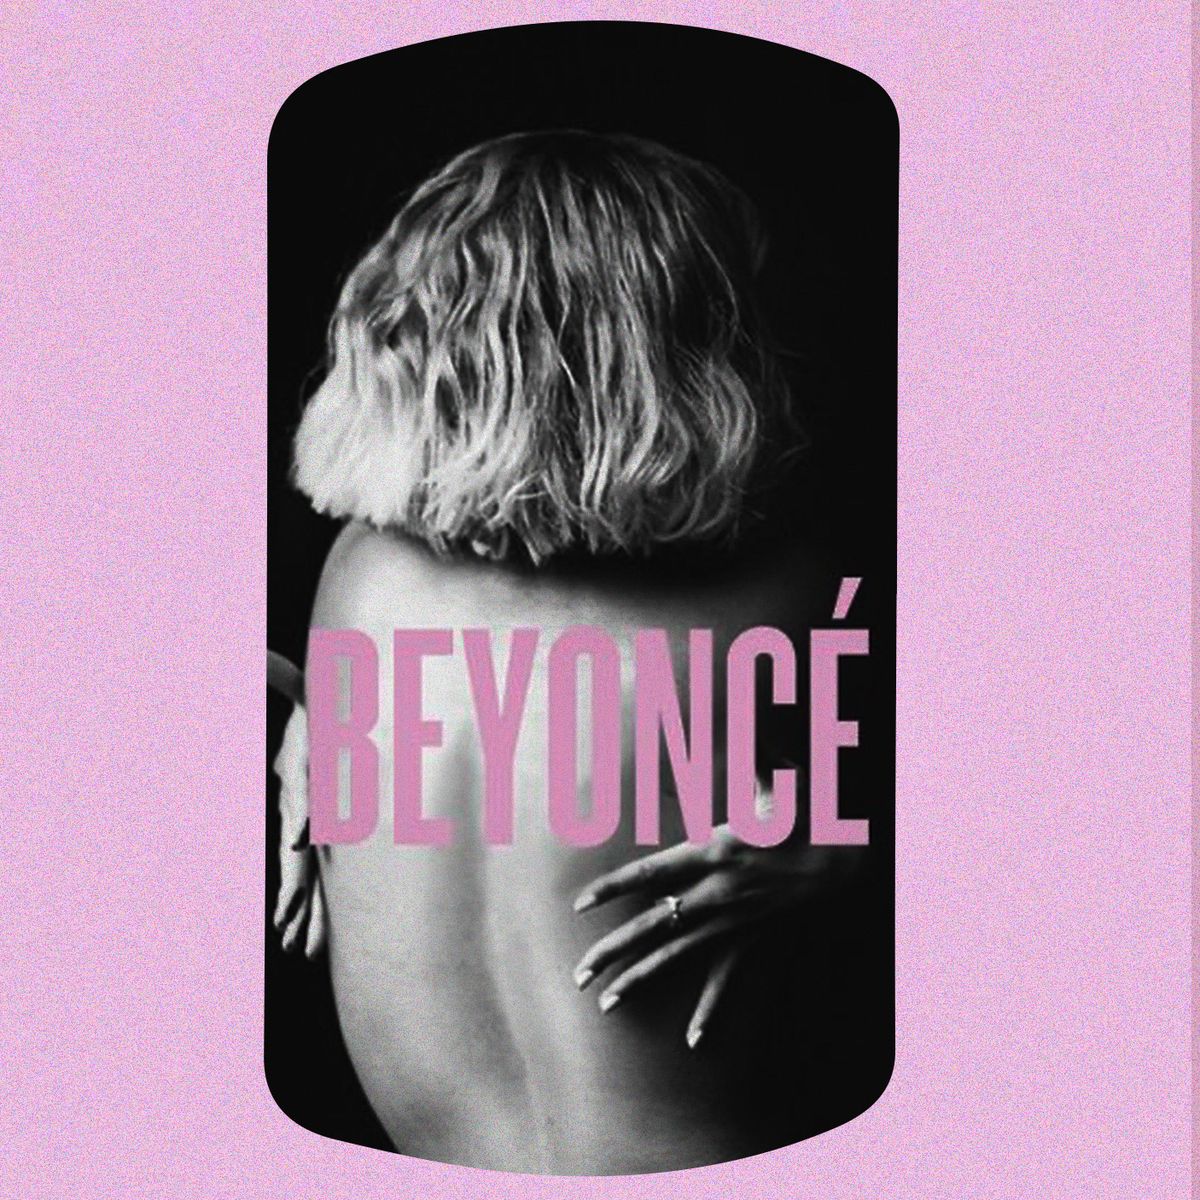 Beyonce reveals cover art for new album amid countdown to